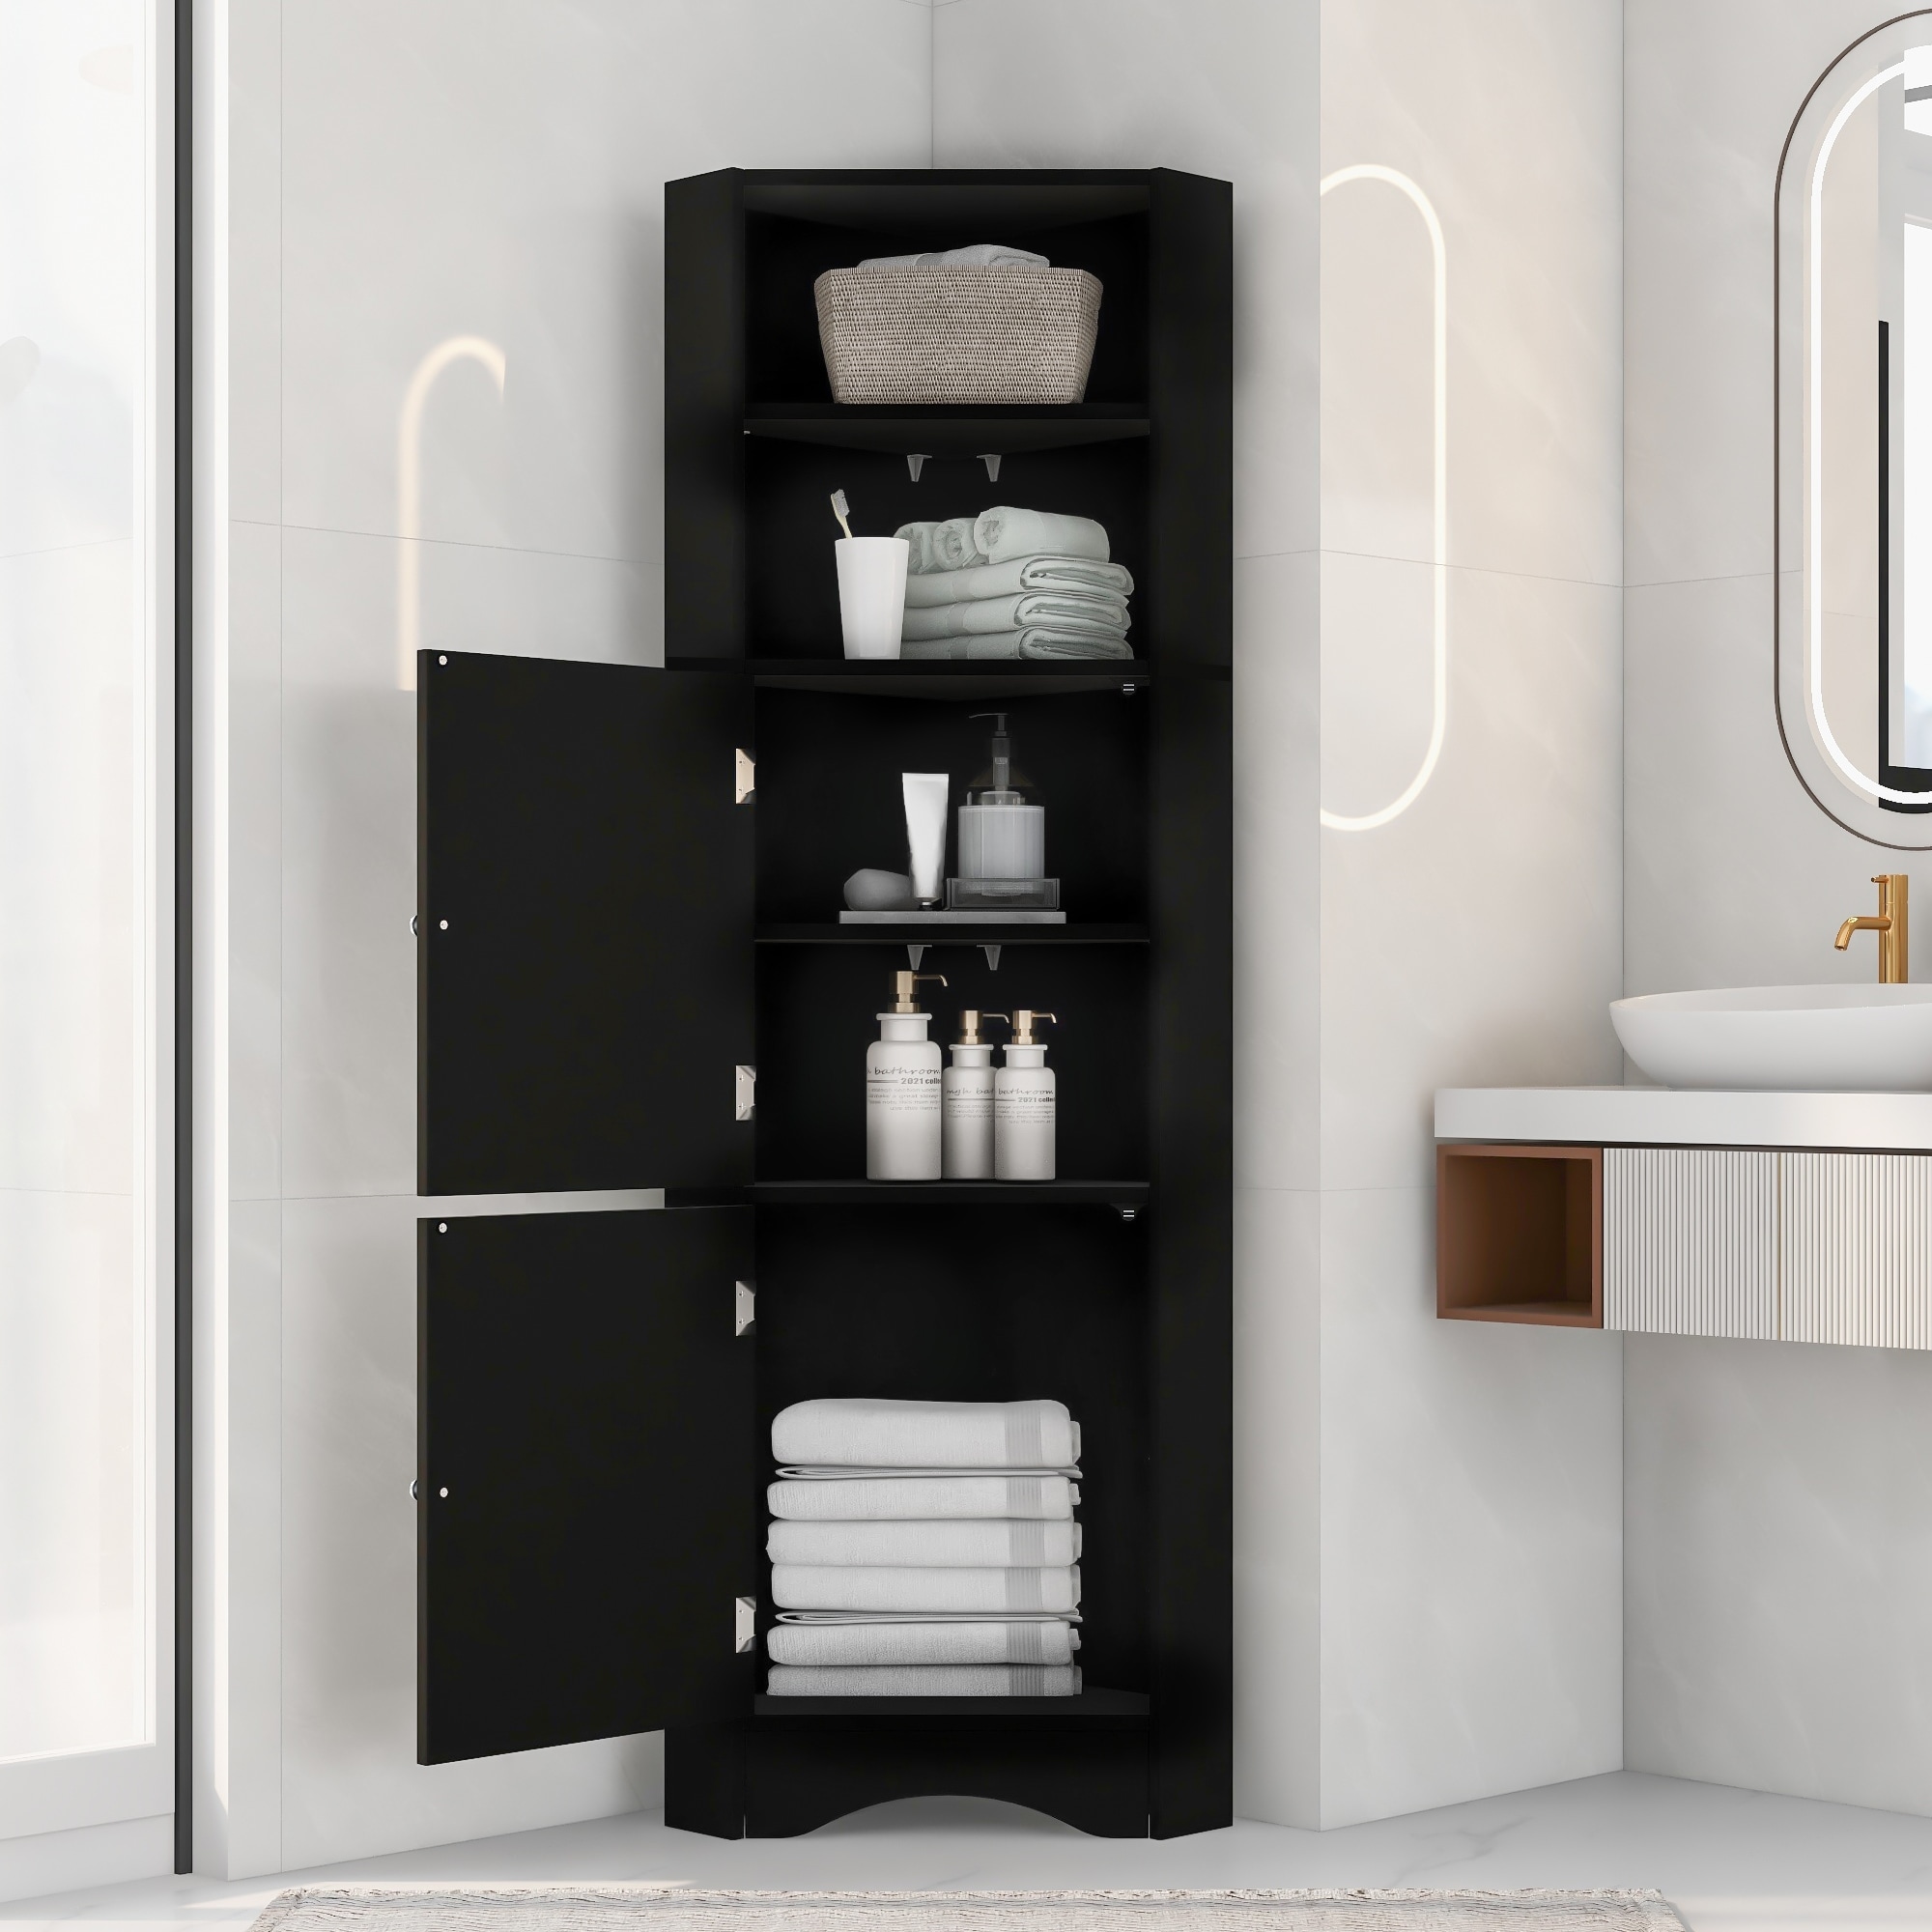 https://ak1.ostkcdn.com/images/products/is/images/direct/79627744f71e92afb19286b14a50666ccdff829c/Tall-Bathroom-Corner-Cabinet%2C-Freestanding-Storage-Cabinet-with-Doors-and-Adjustable-Shelves.jpg